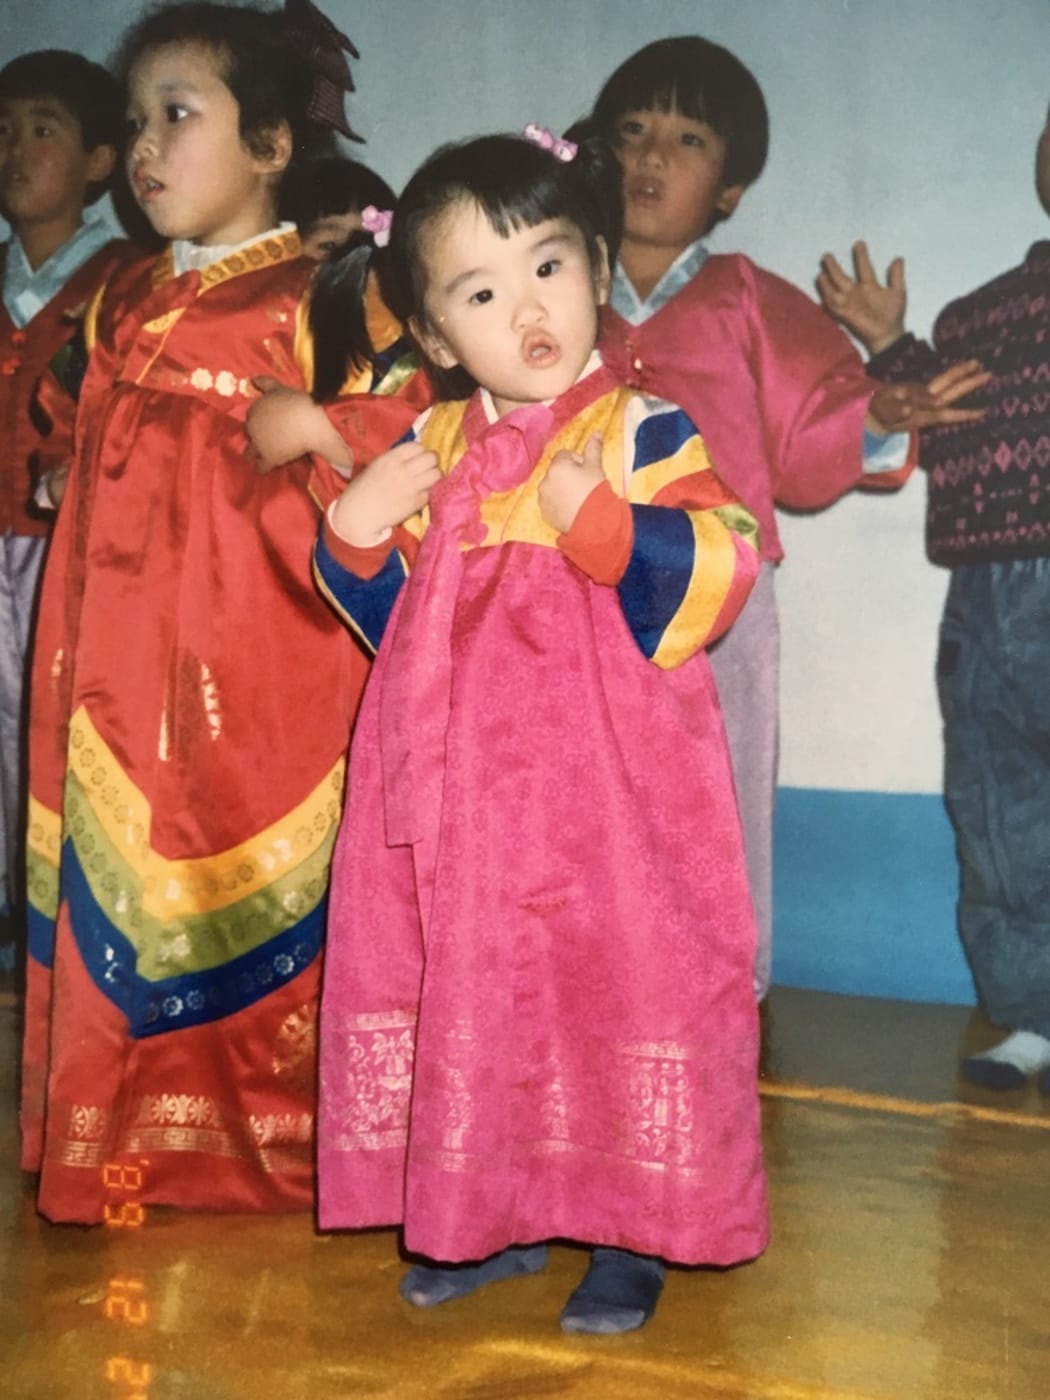 Maria Mo: "I was 2 here. Reppin’ my hanbok at the Sunday school Christmas show at church. I like to think this was my peak."